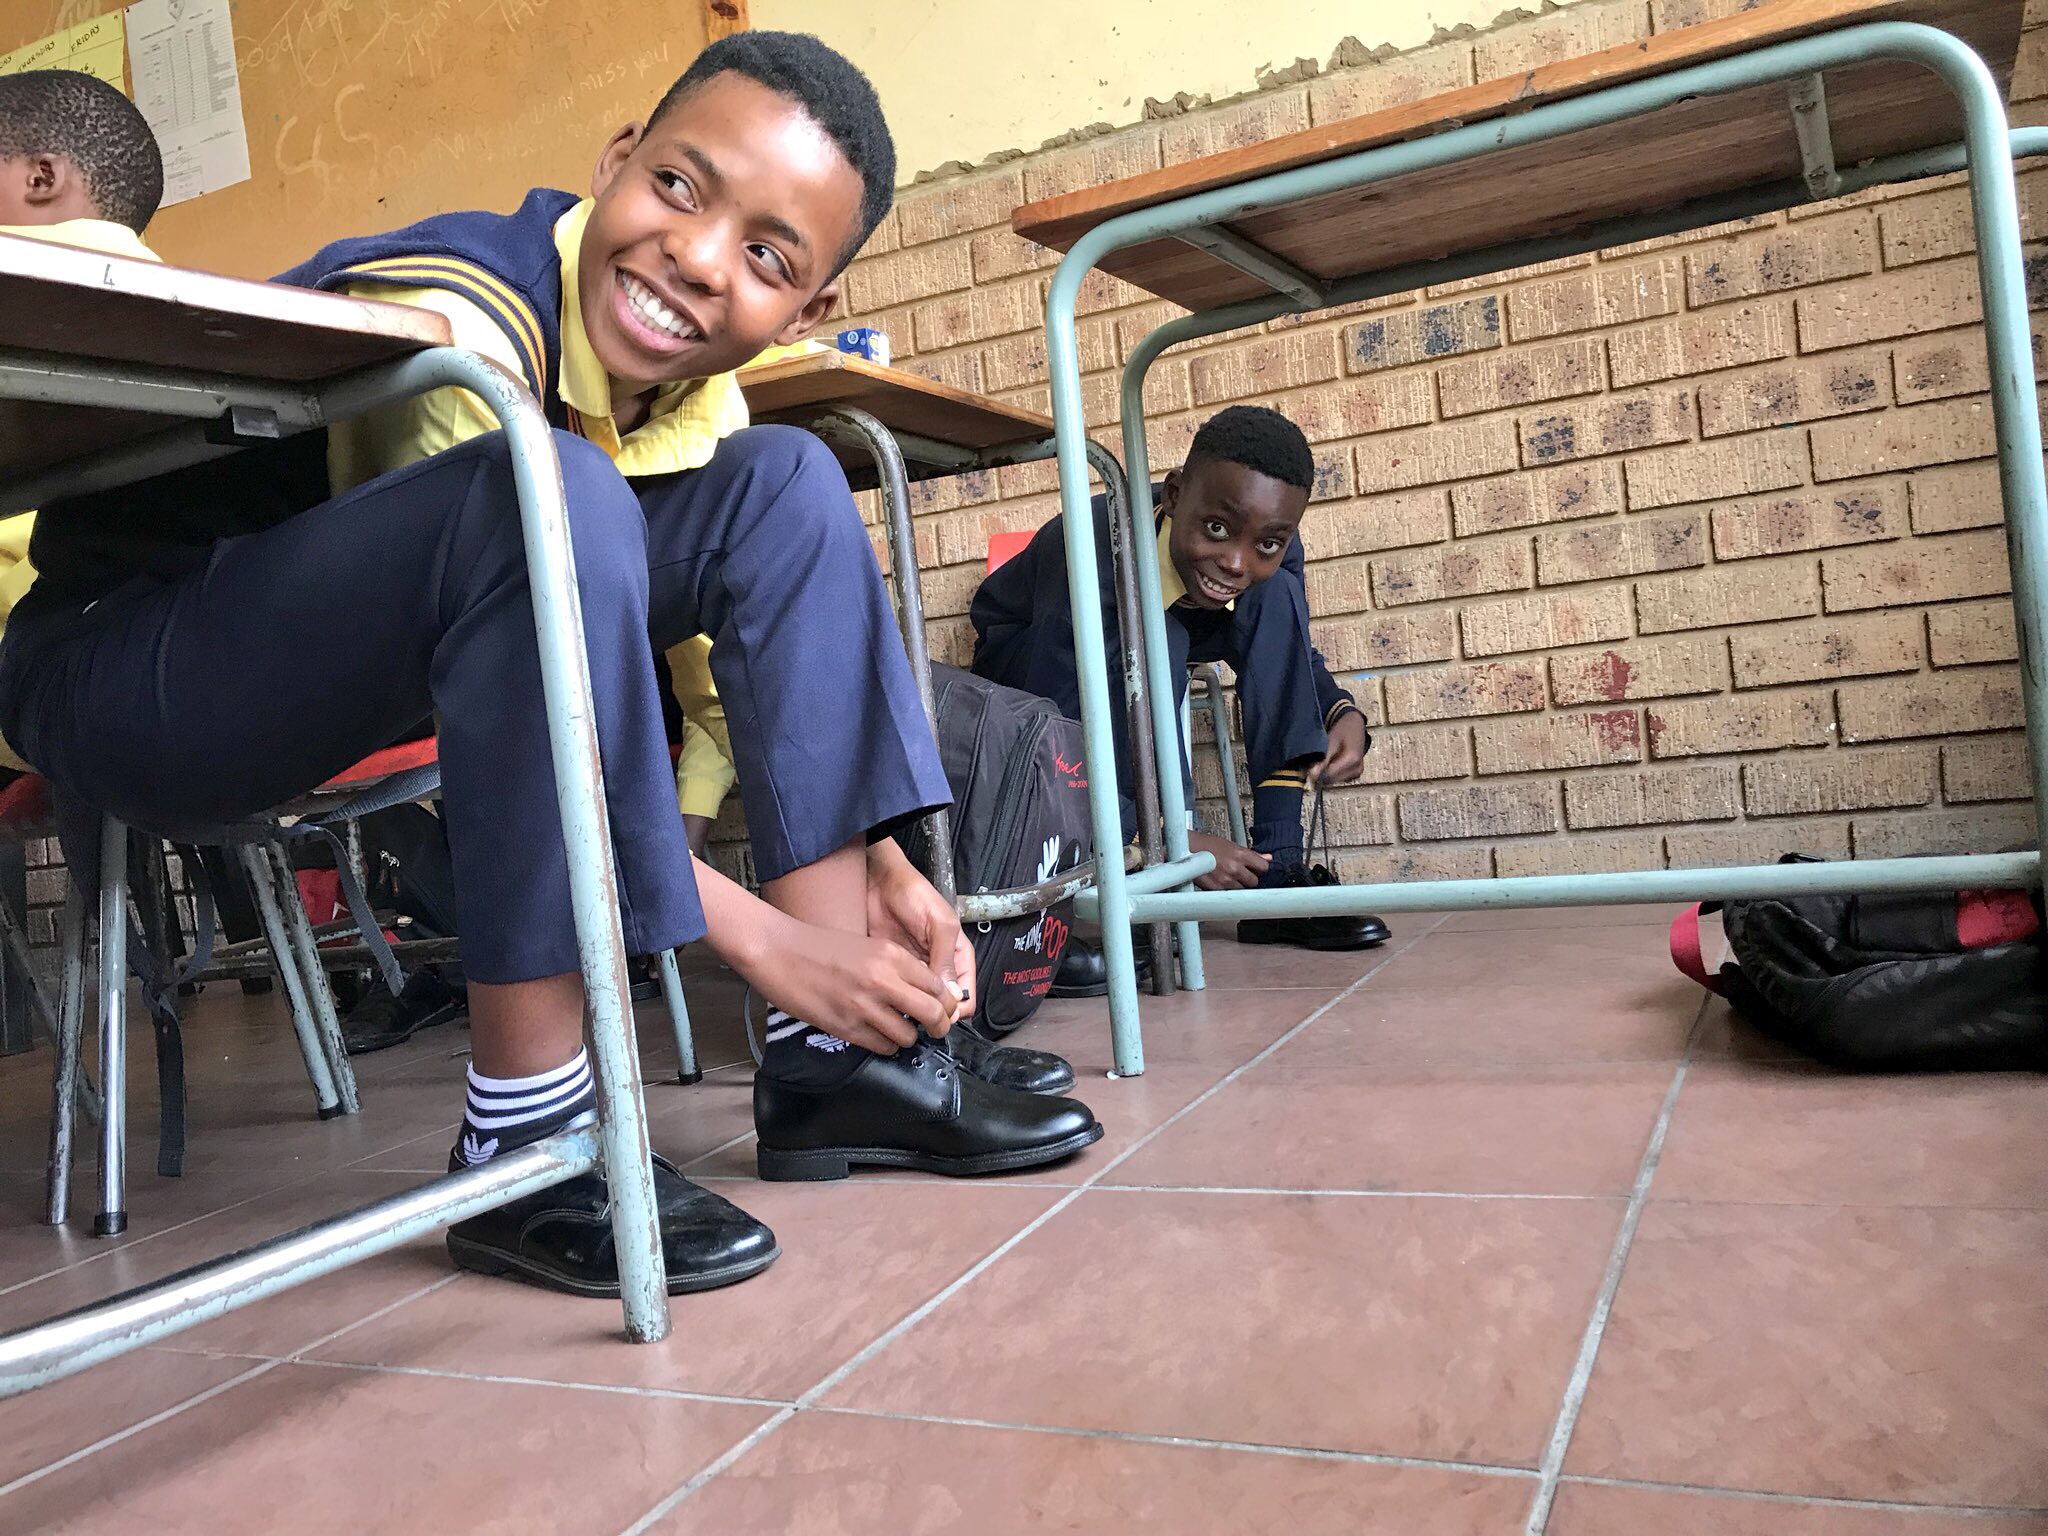 Learners face a long walk to learning without shoes